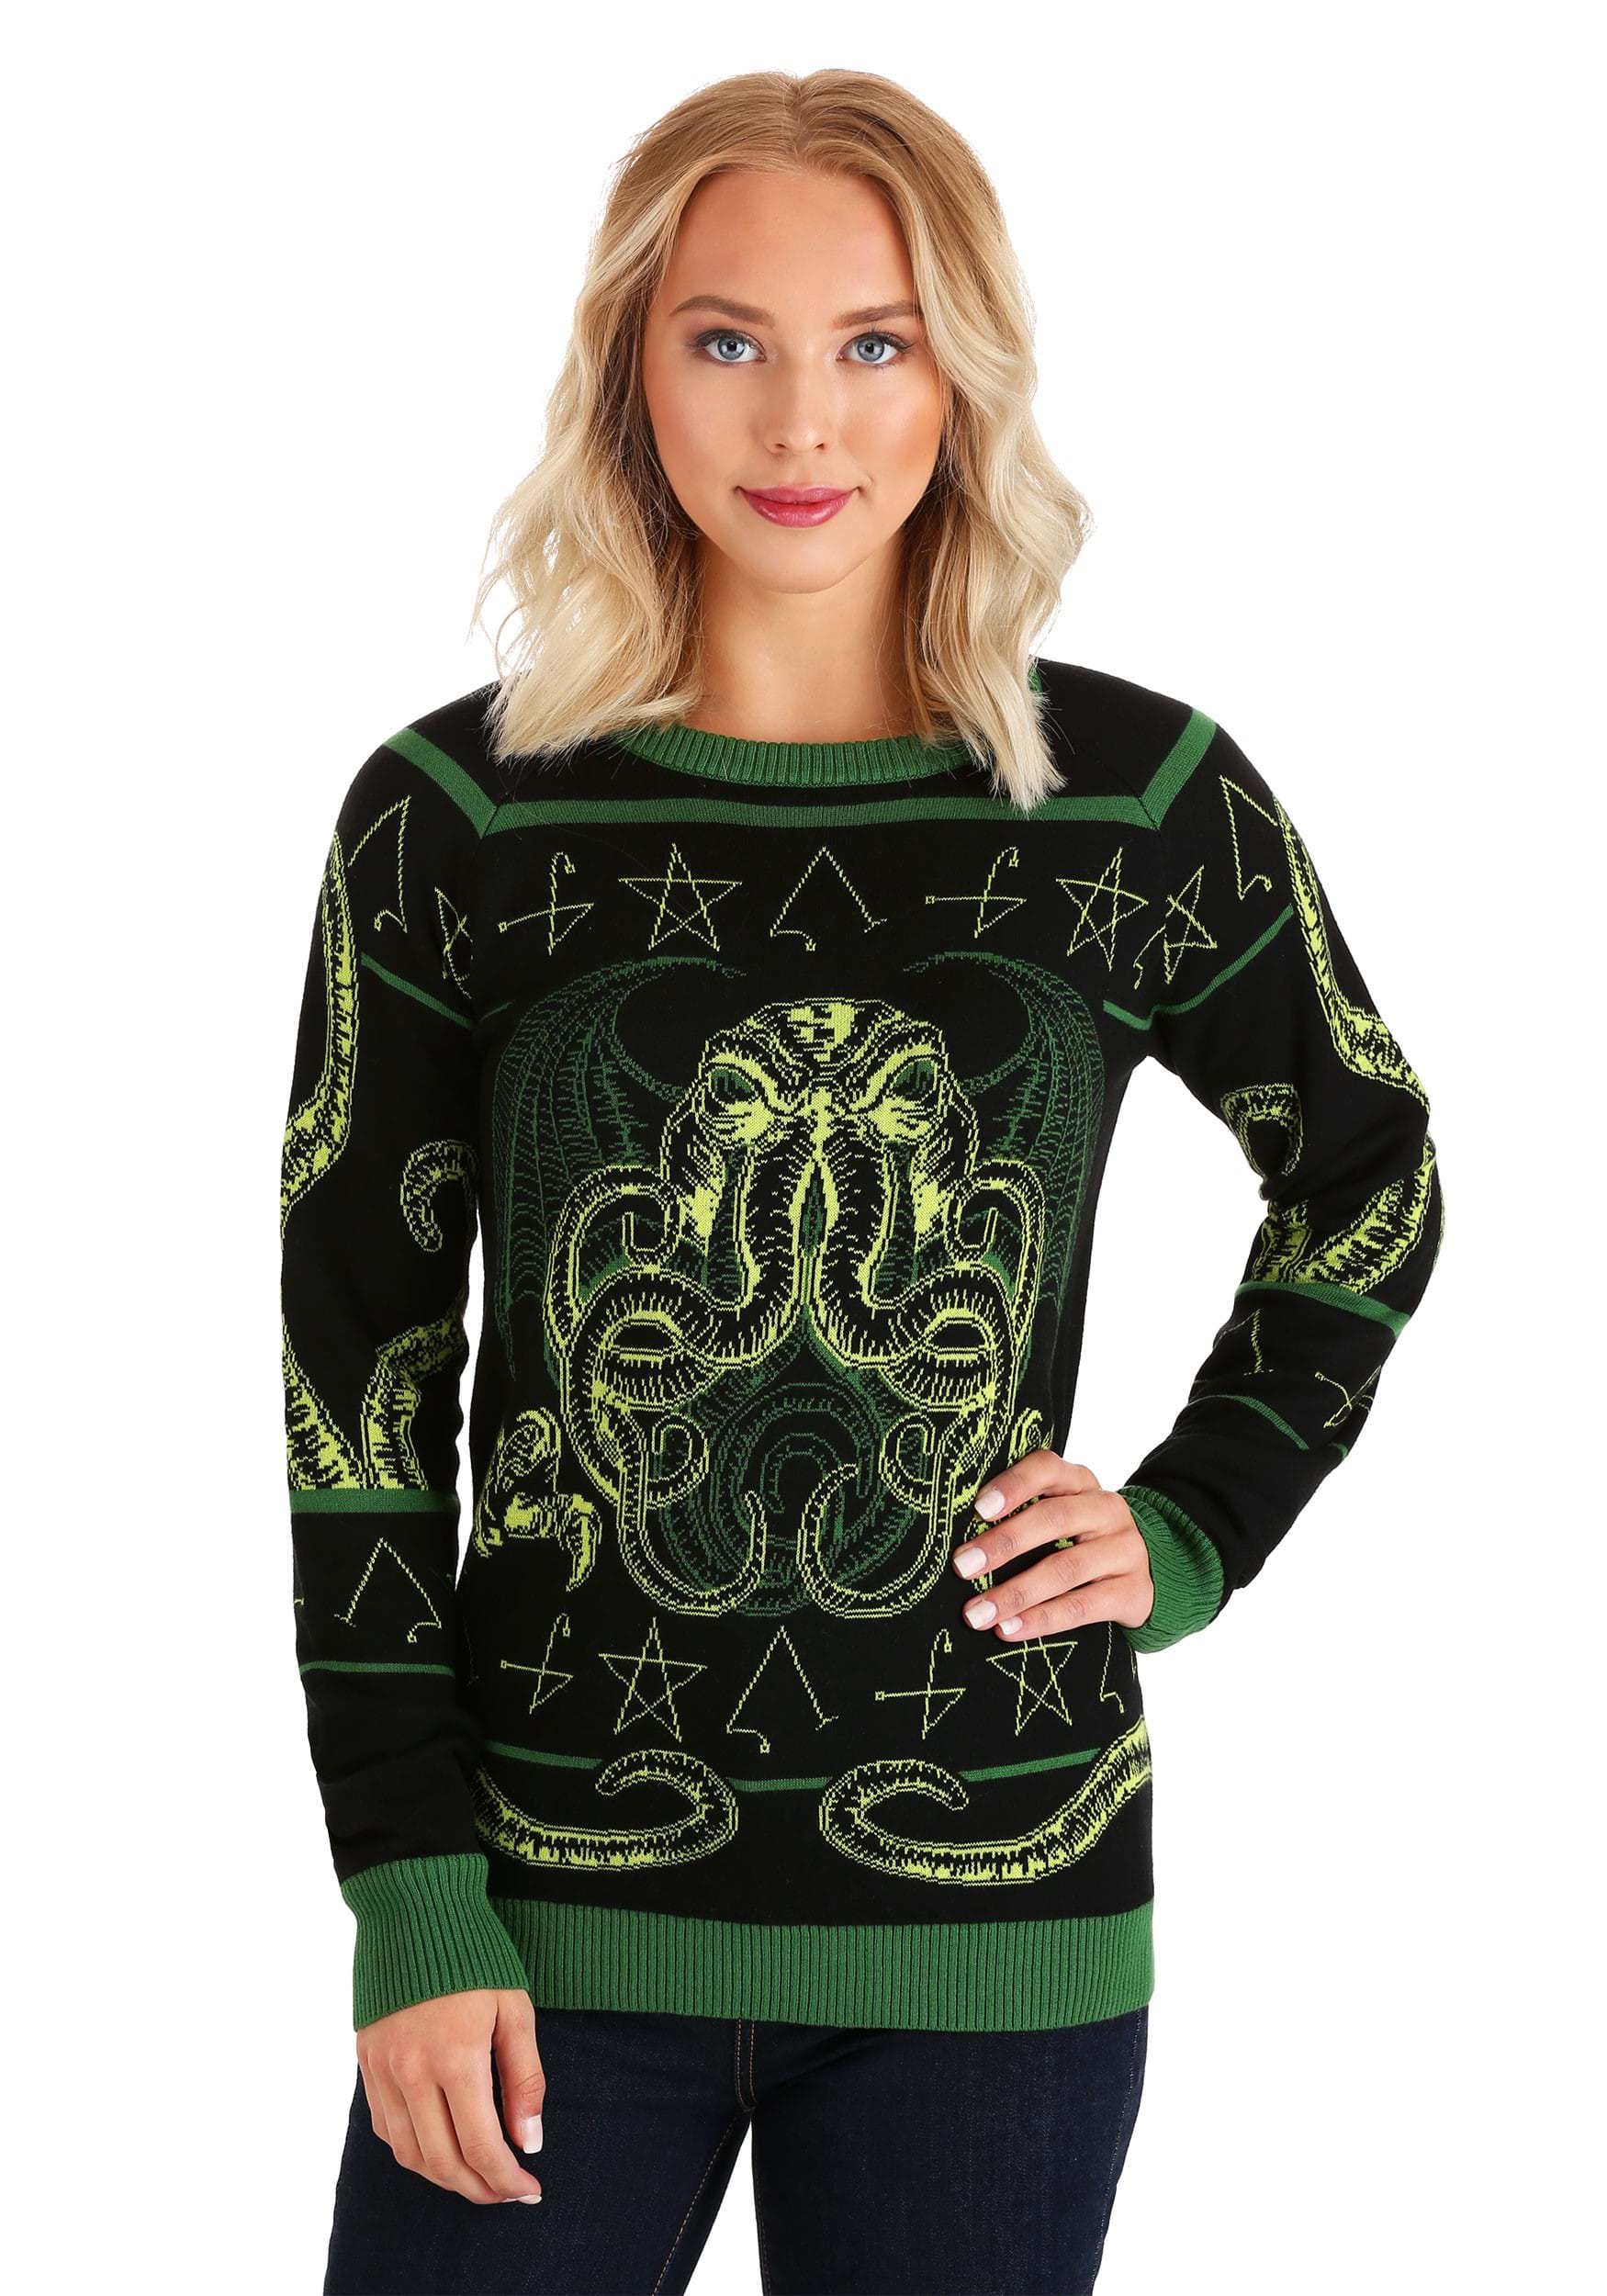 Rage of Cthulhu Adult Ugly Halloween Sweater for Adults